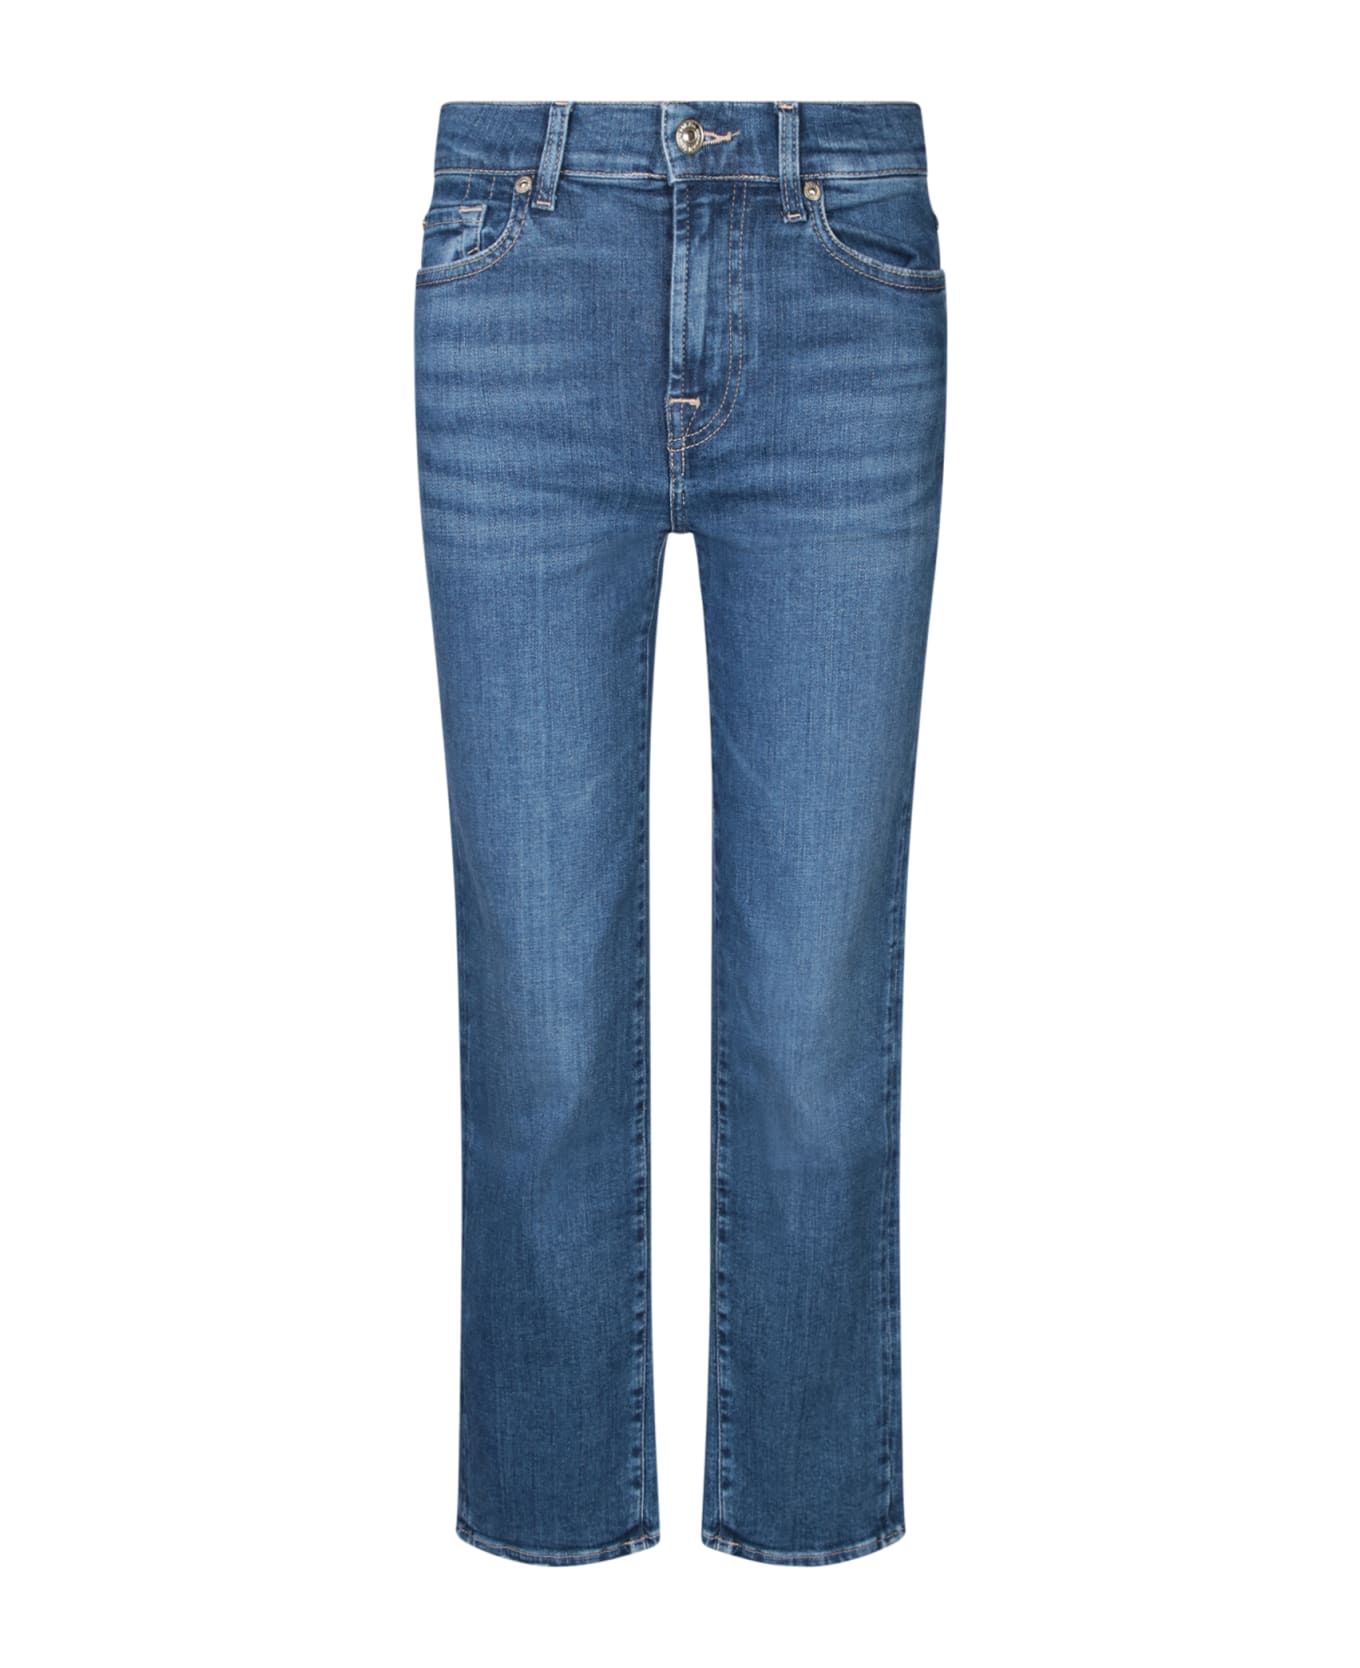 7 For All Mankind Straight Crop Blue Jeans - Blue デニム